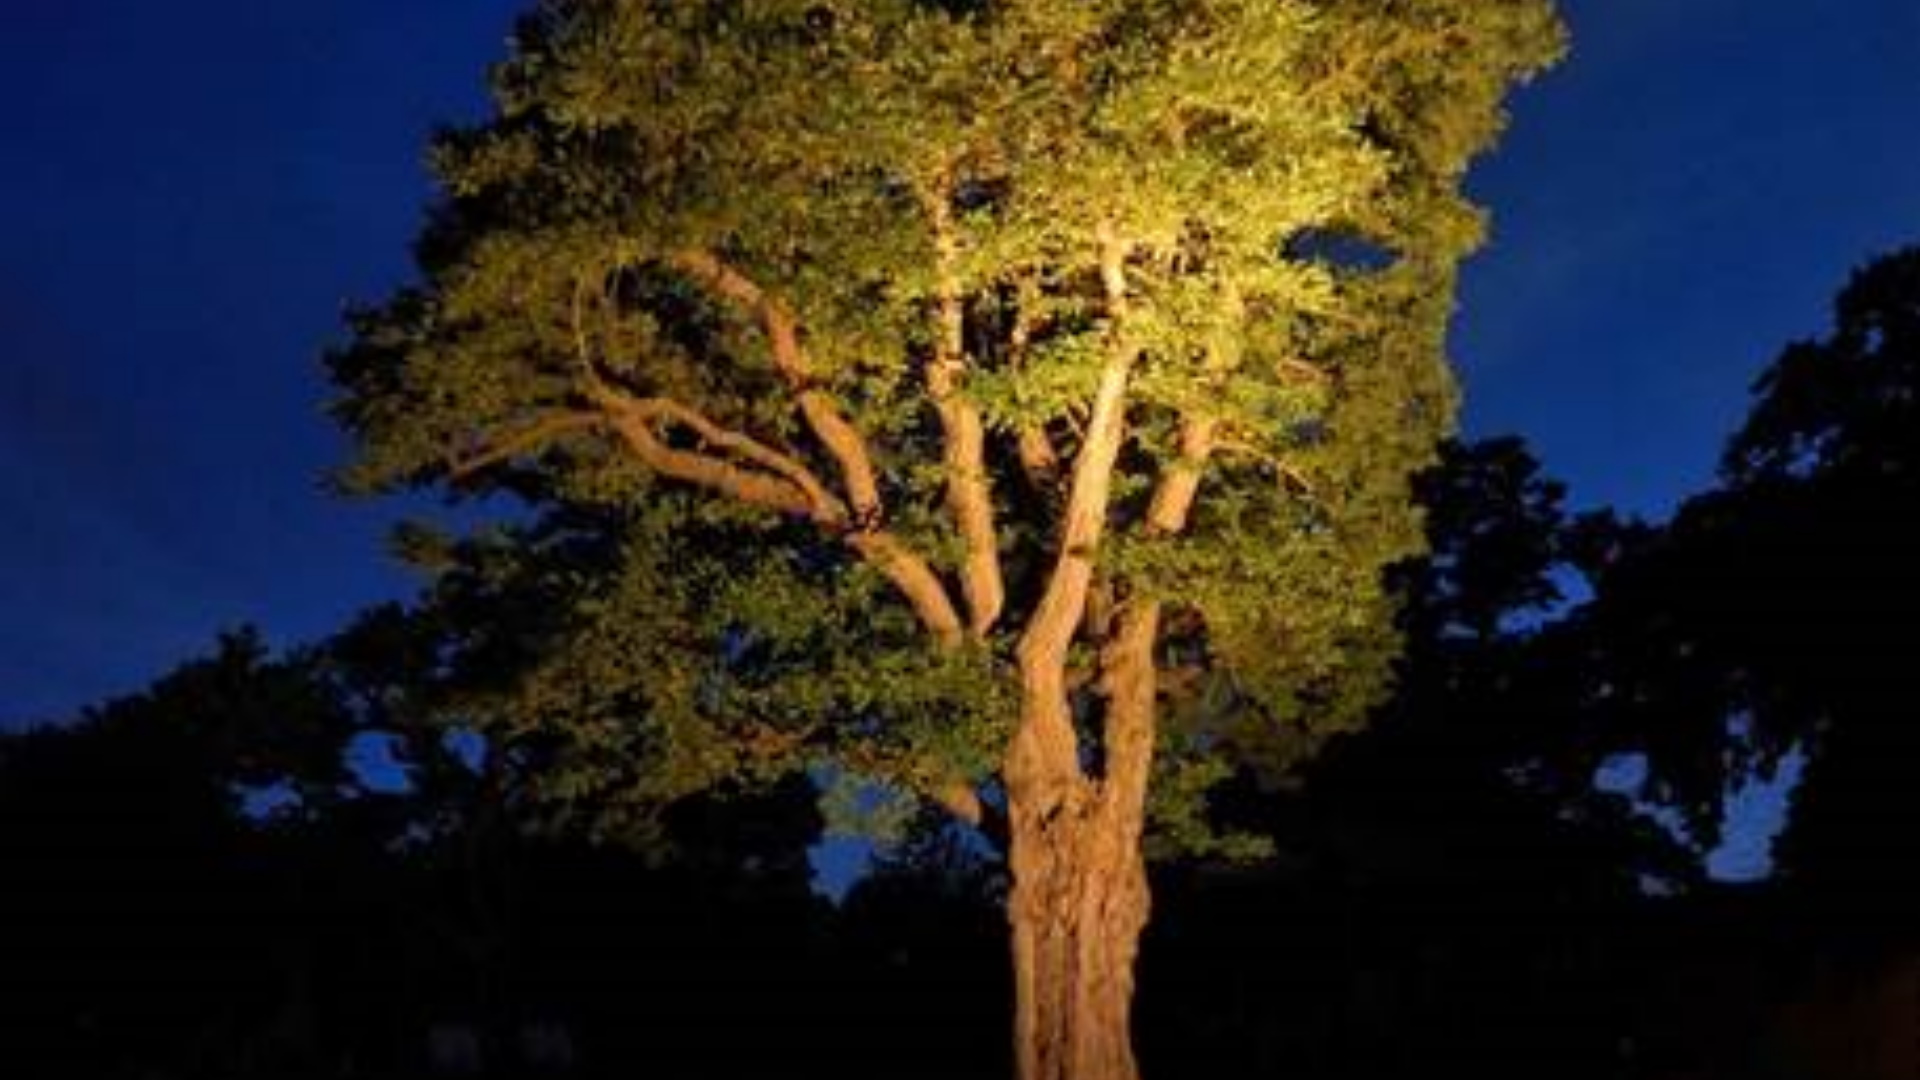 Outdoor lighting techniques: A guide for lighting trees